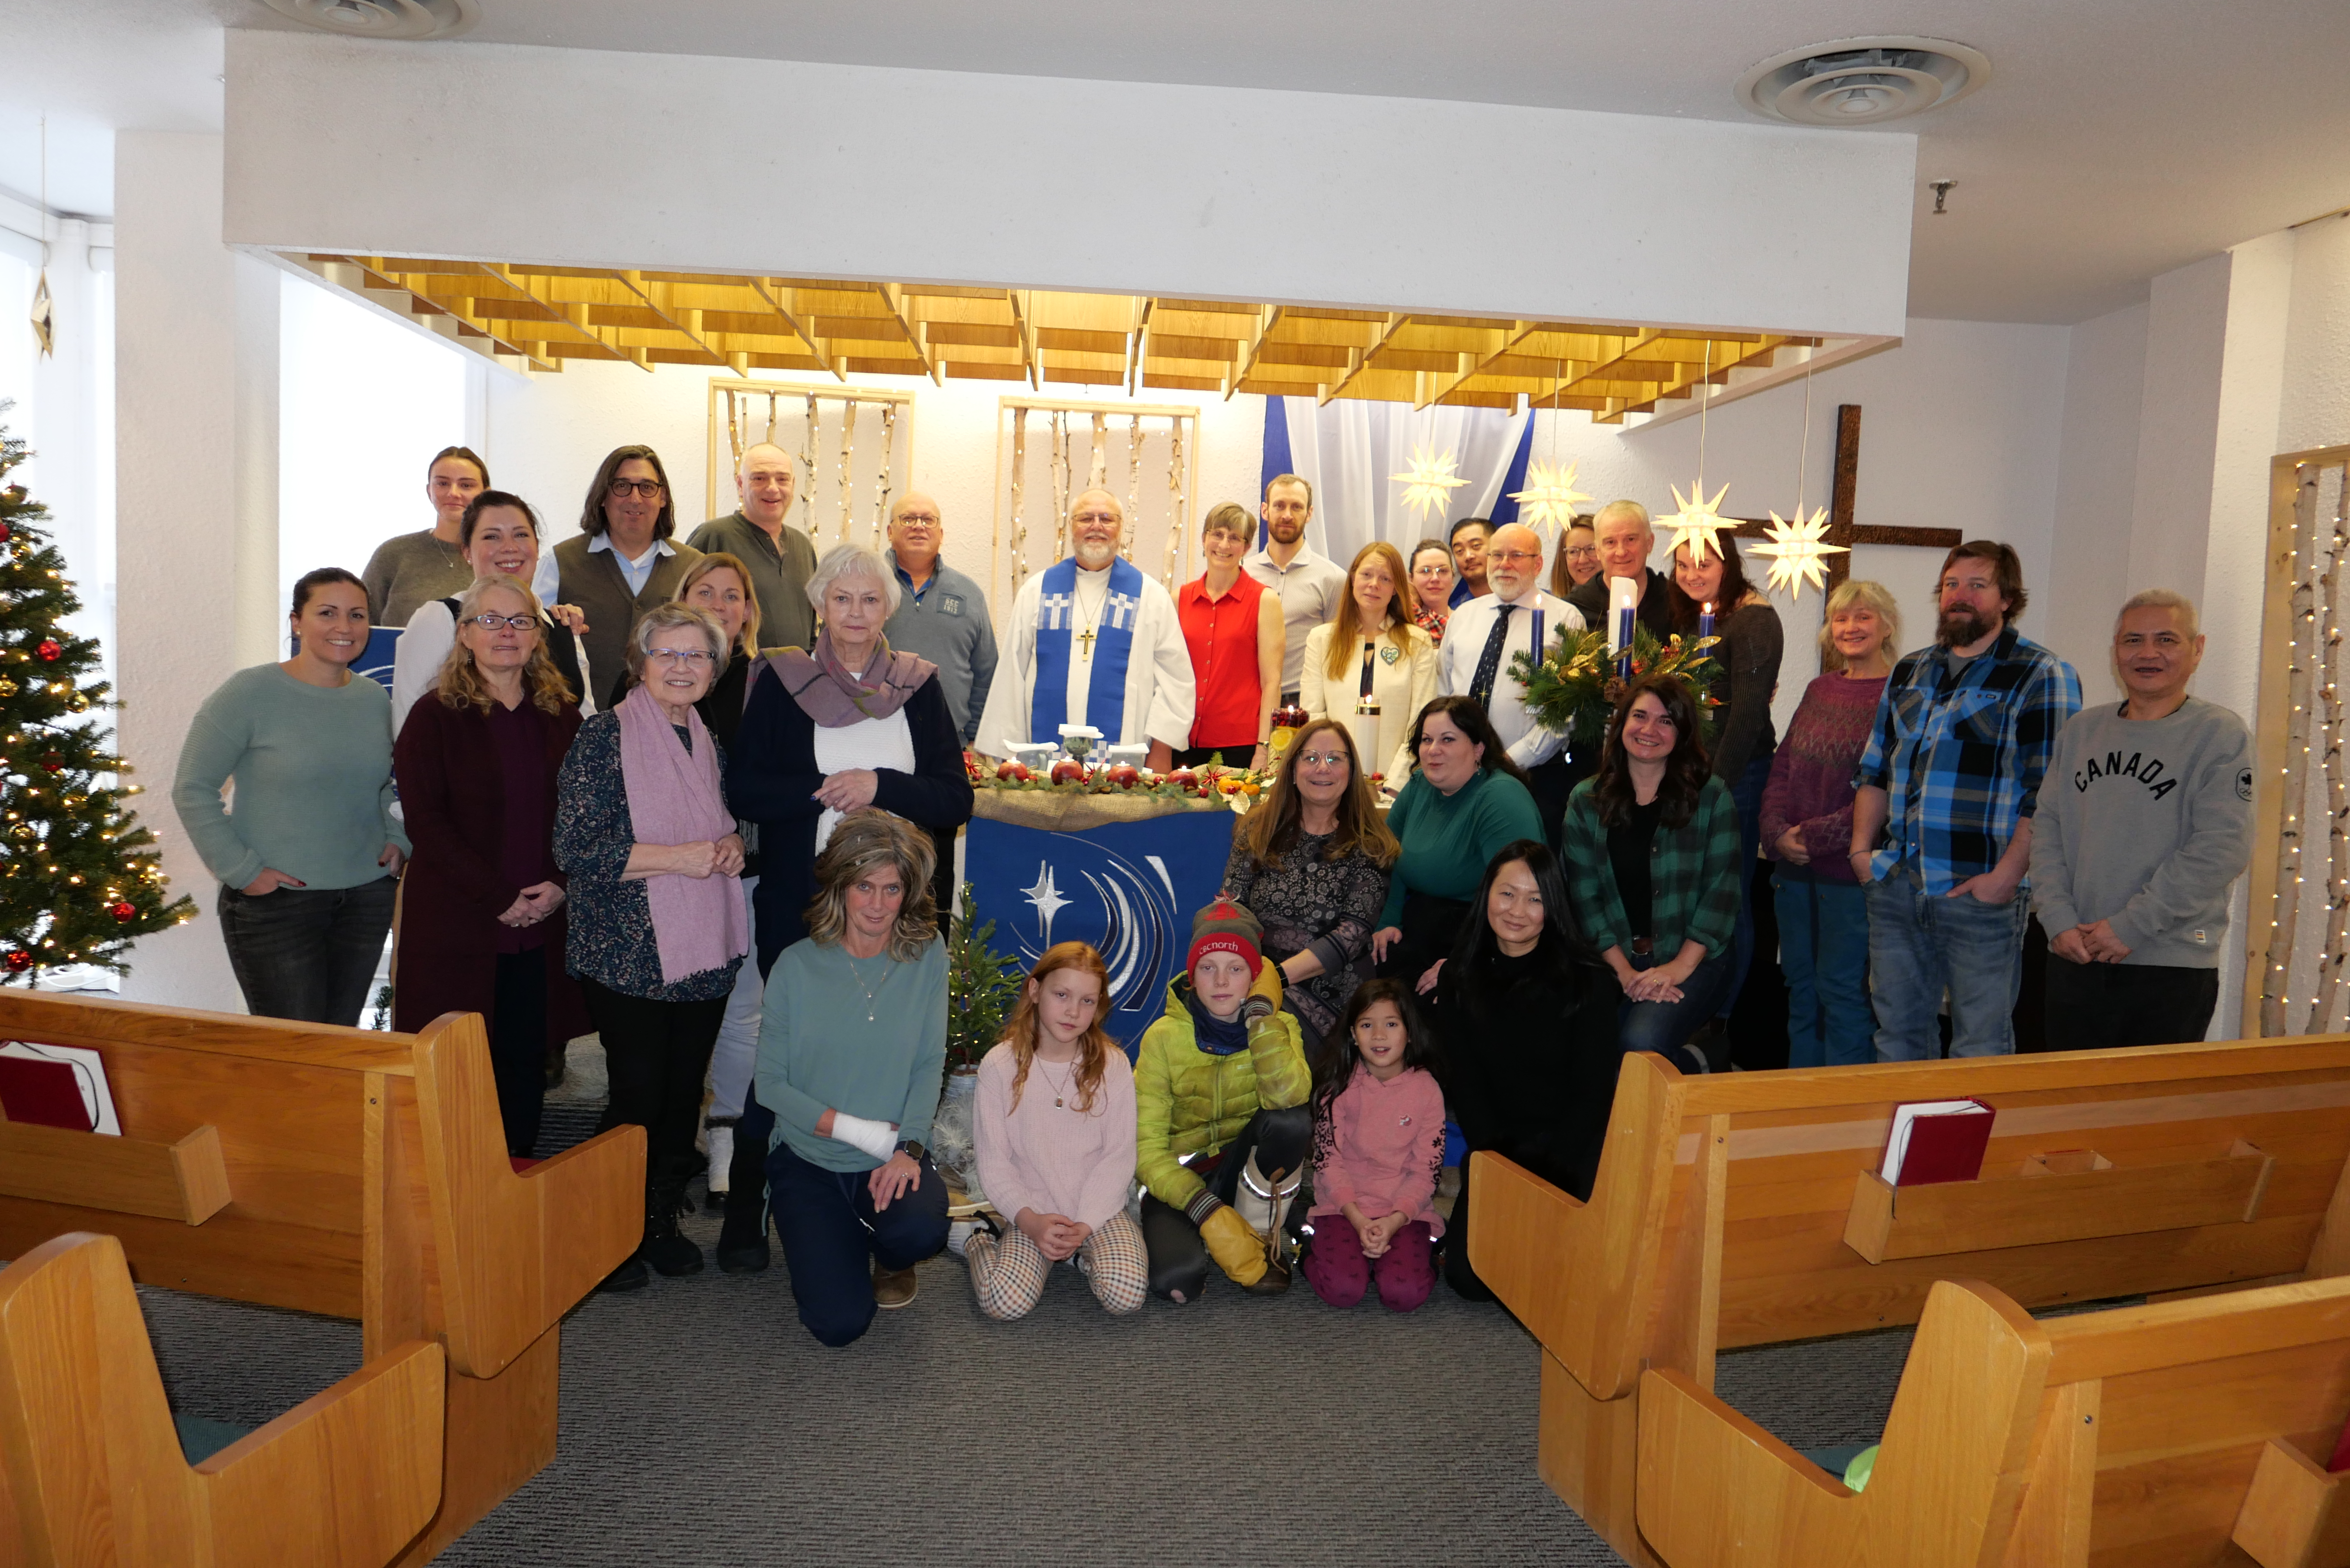 The Yellowknife Community Foundation announces the establishment of the Holy Family Lutheran Legacy Fund